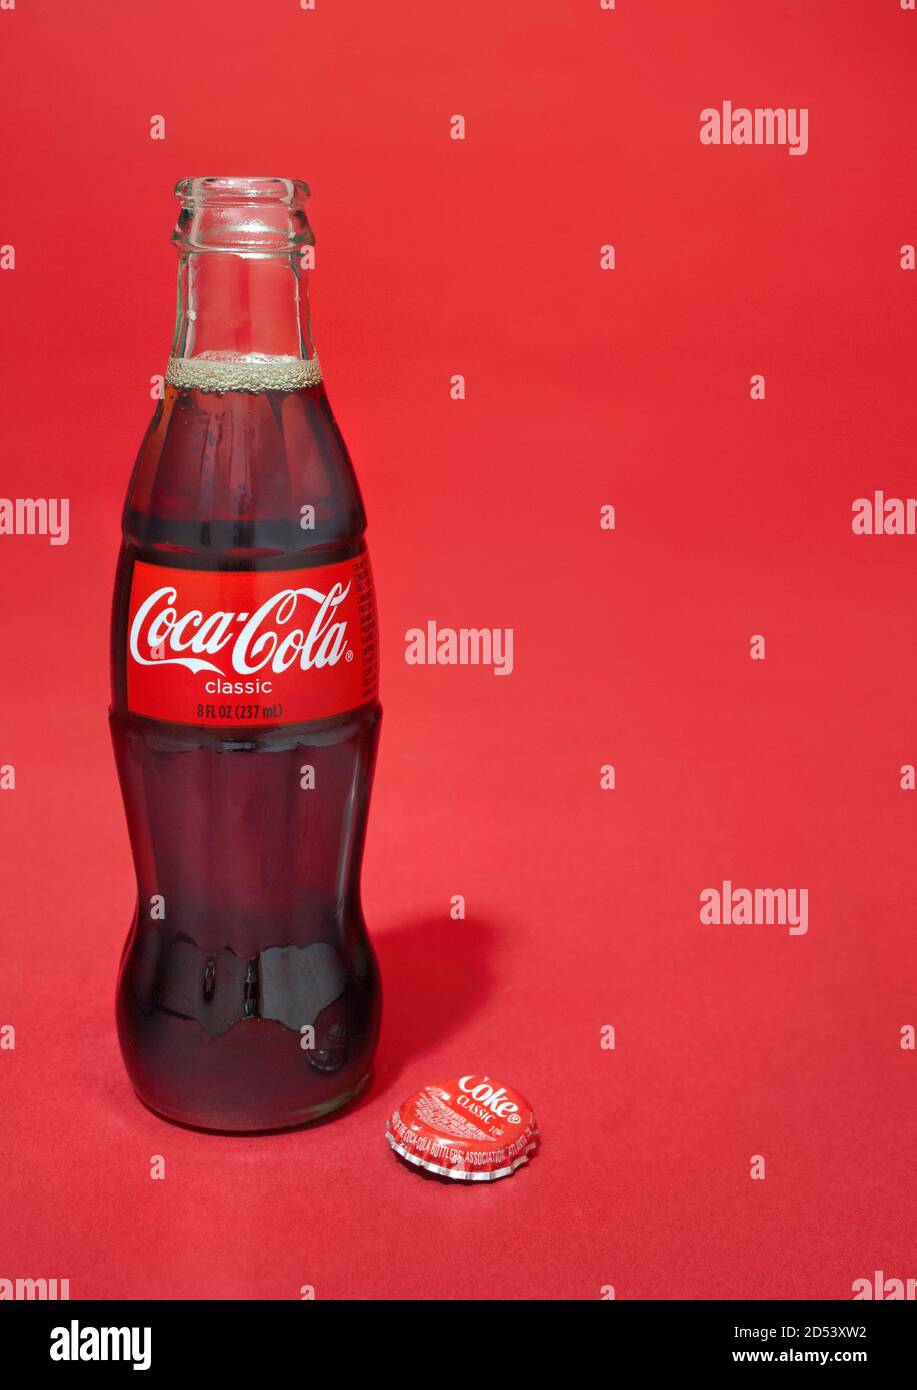 Open glass coca-cola bottle photographed on a red background Stock Photo -  Alamy